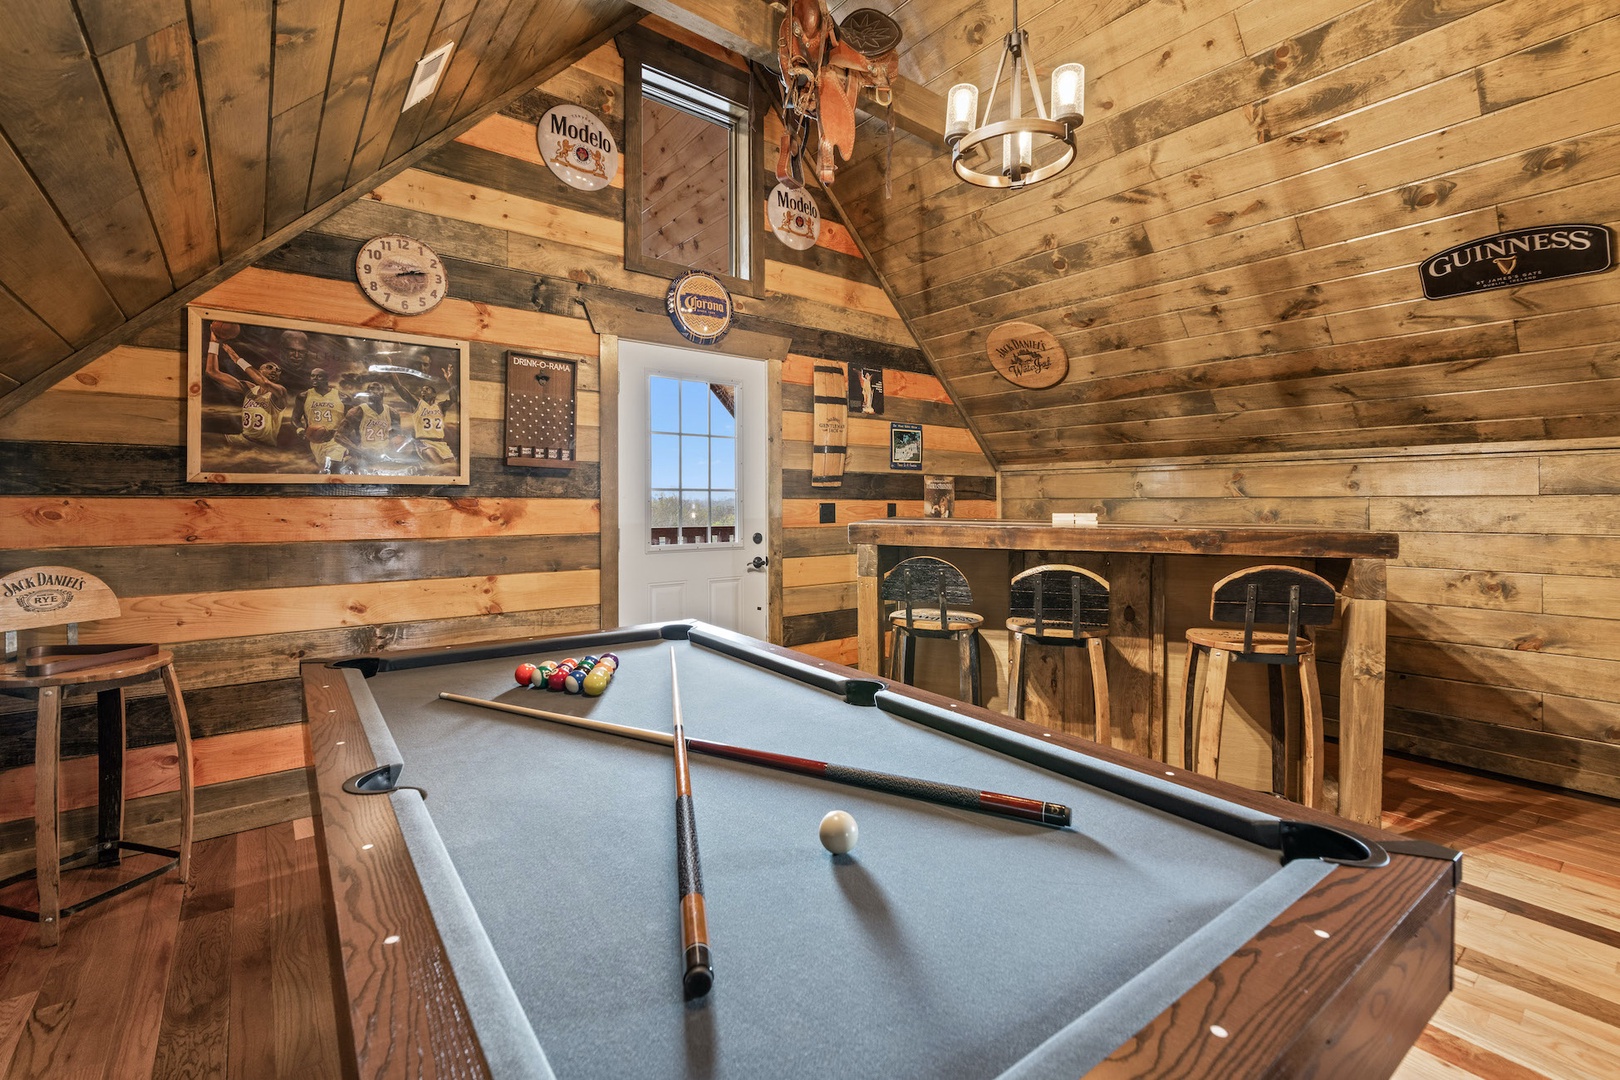 Rack 'em up and sink into fun in the game room